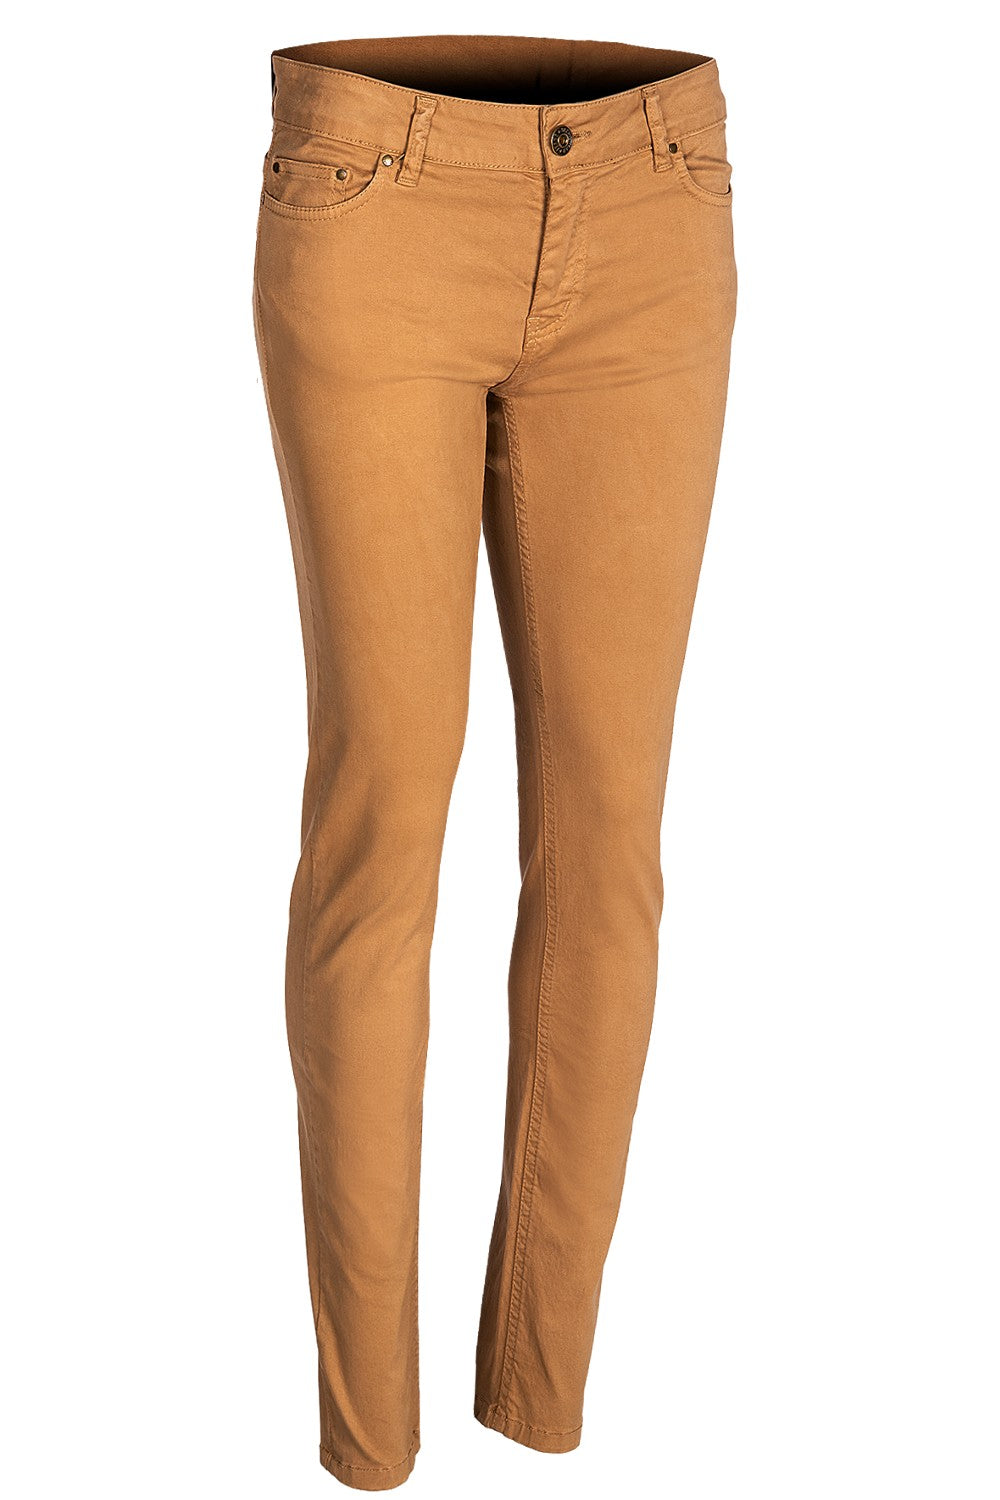 Baleno Womens Cotton Trousers in Camel 